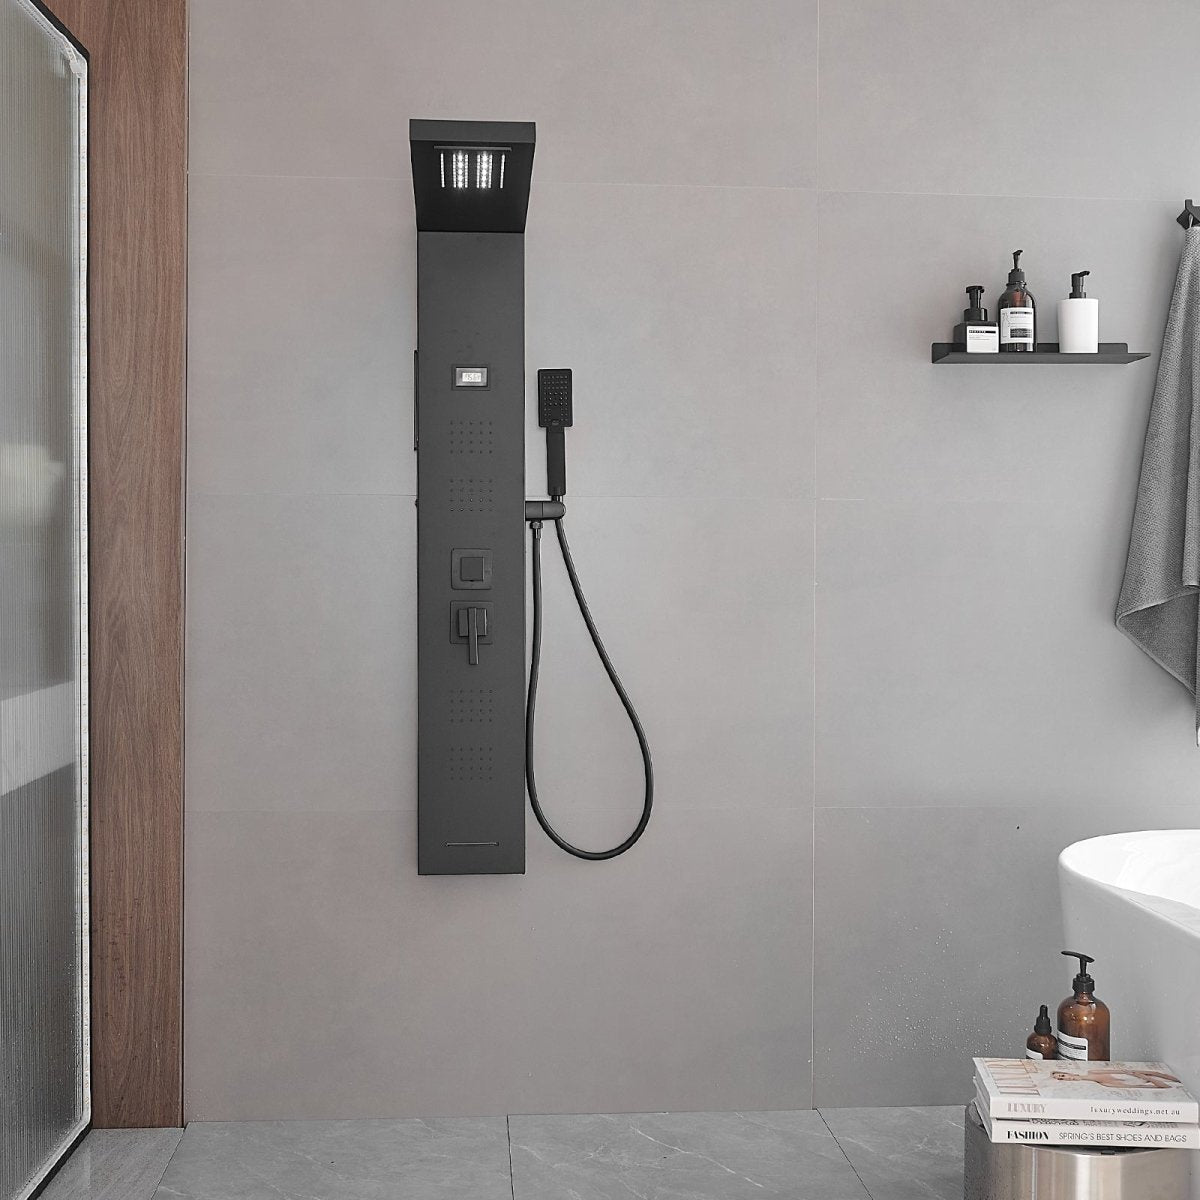 4-Jet Rainfall Shower Panel System in Stainless Steel Black - buyfaucet.com